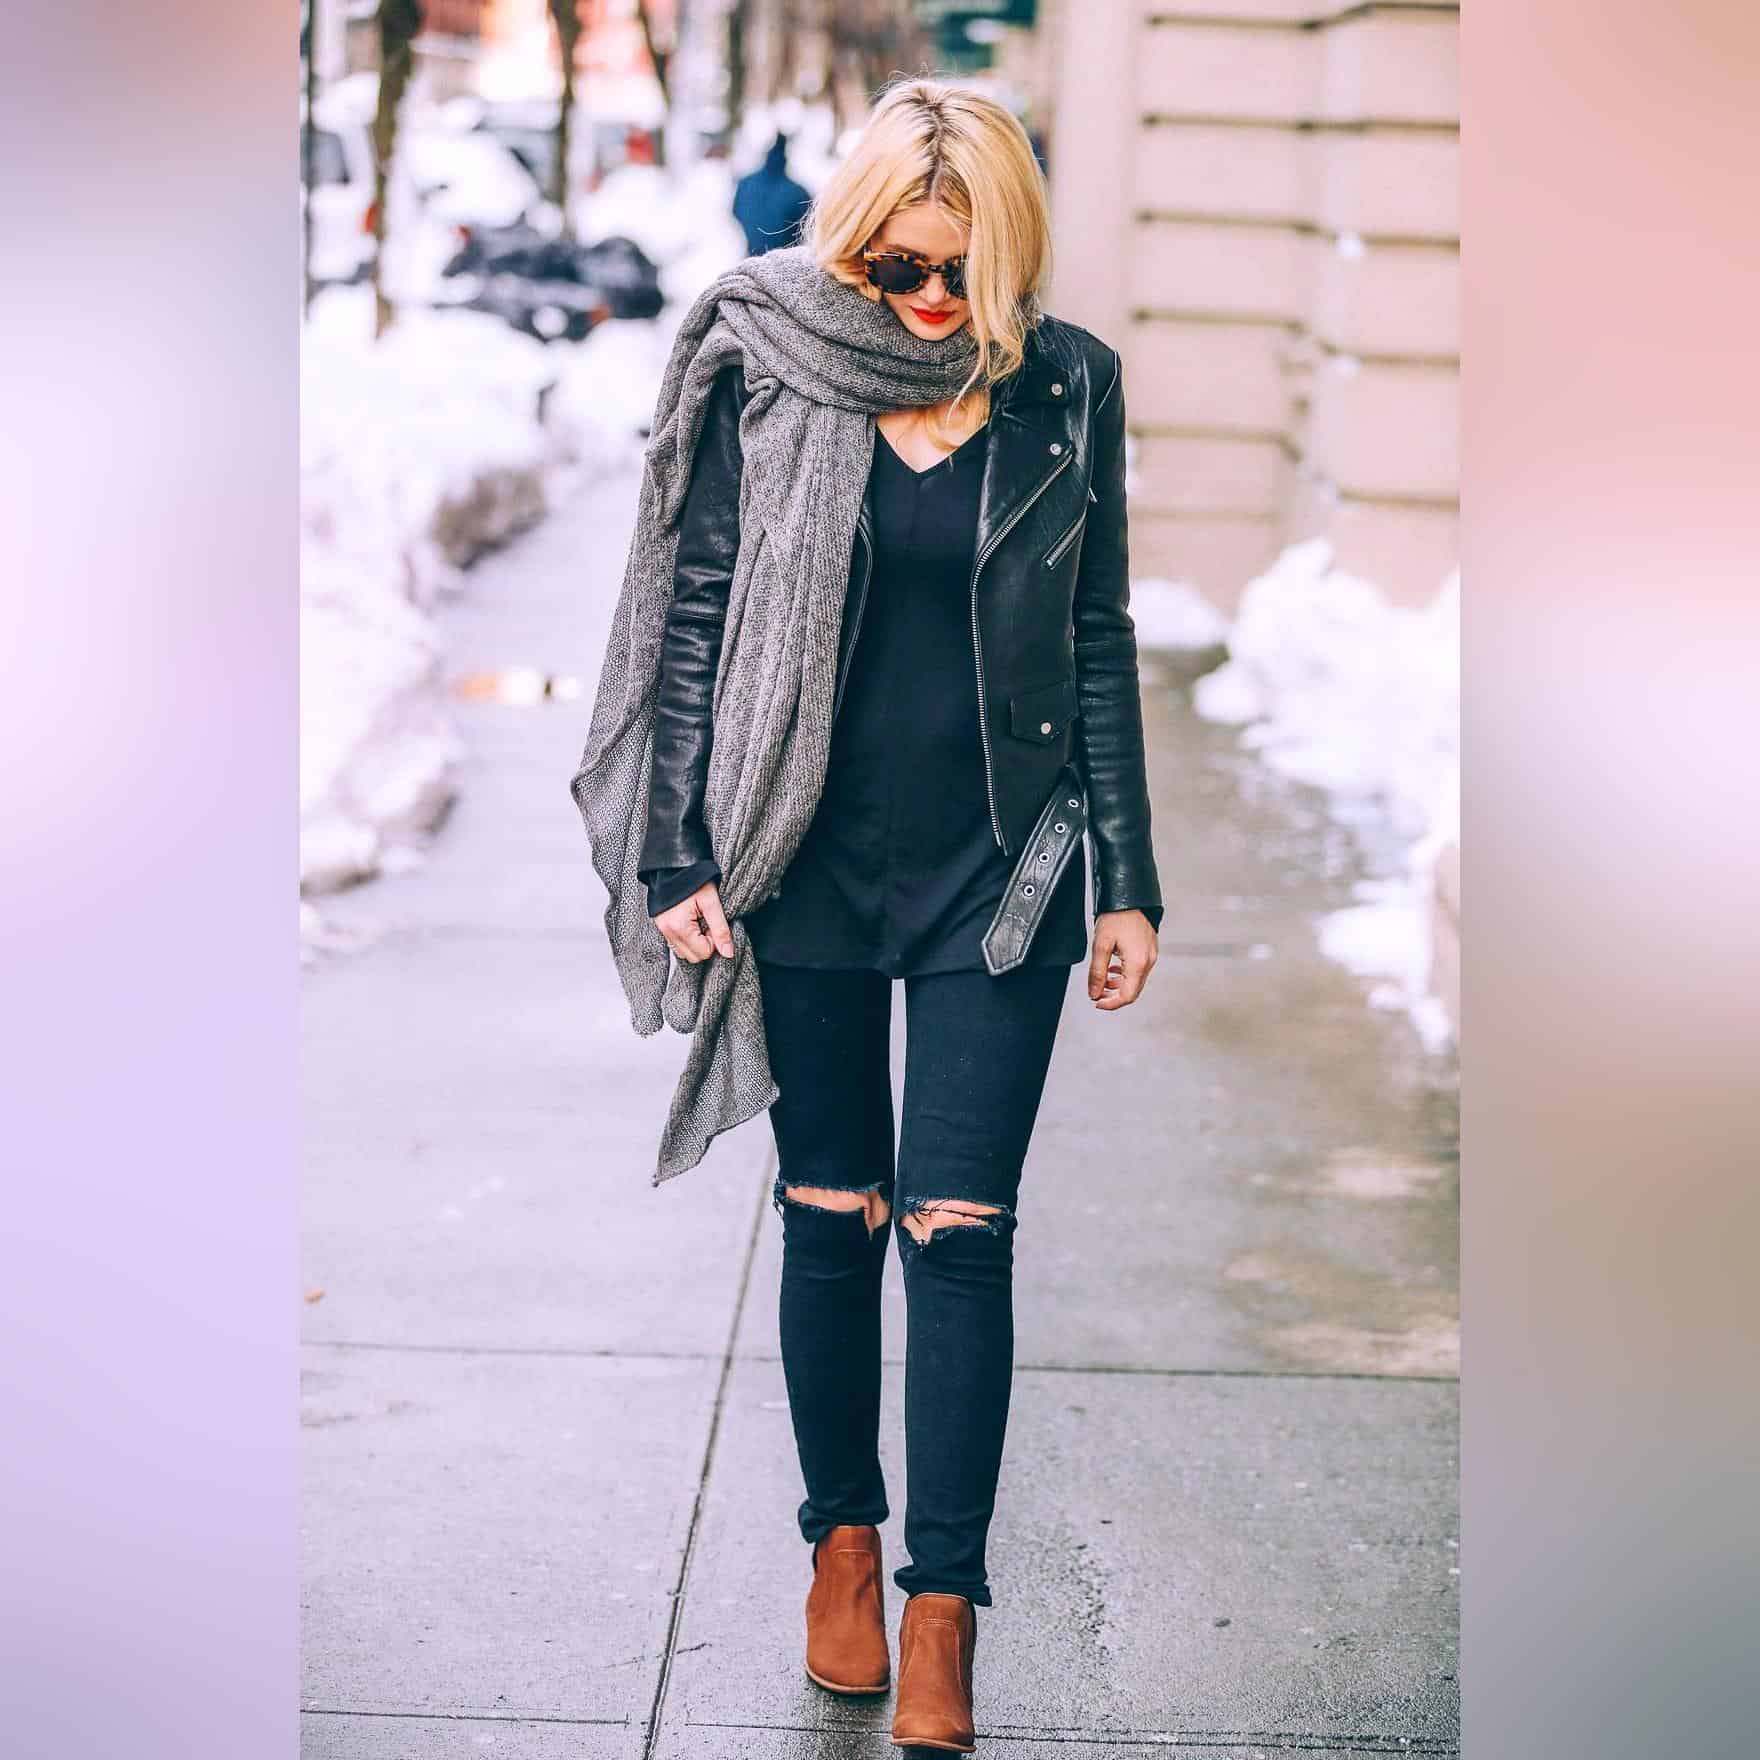 Oversized Leather Jacket Outfit: Effortless Ways to Style 2023